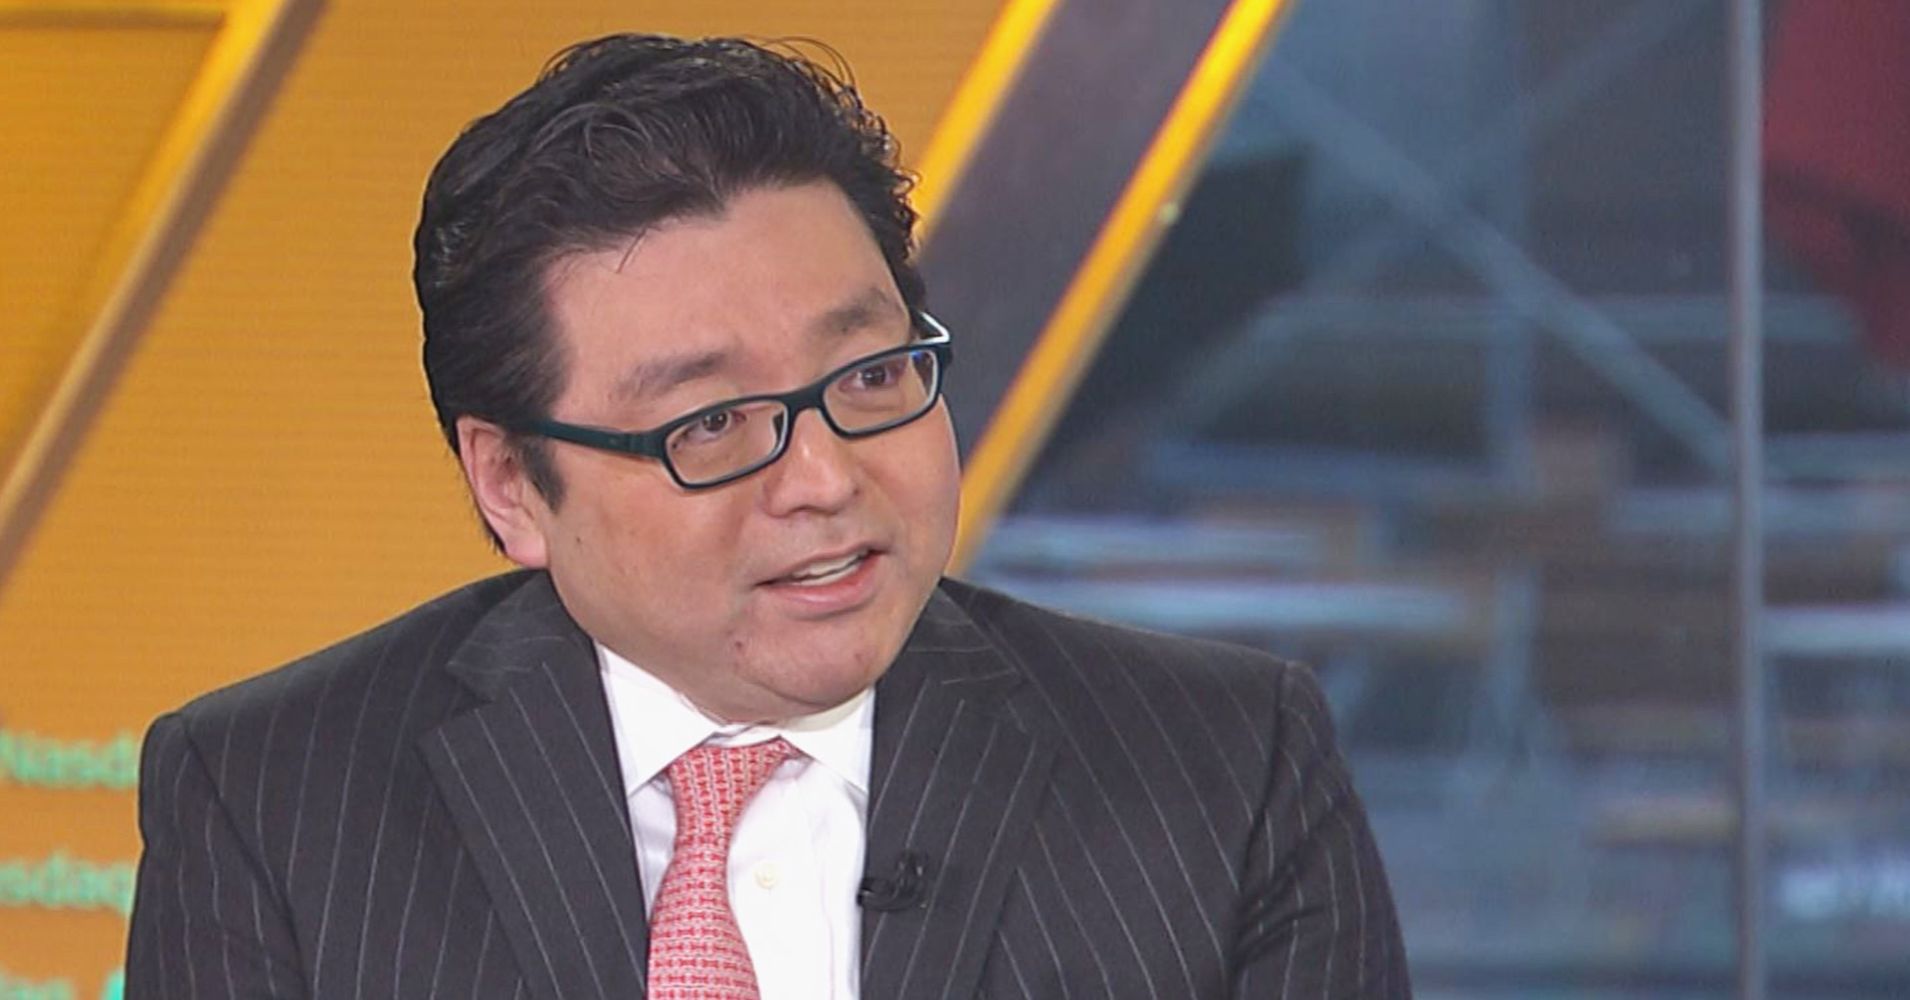 Bitcoin at $15,000 – Tom Lee Stands Firmly on Price Prediction Despite Current Decline 10